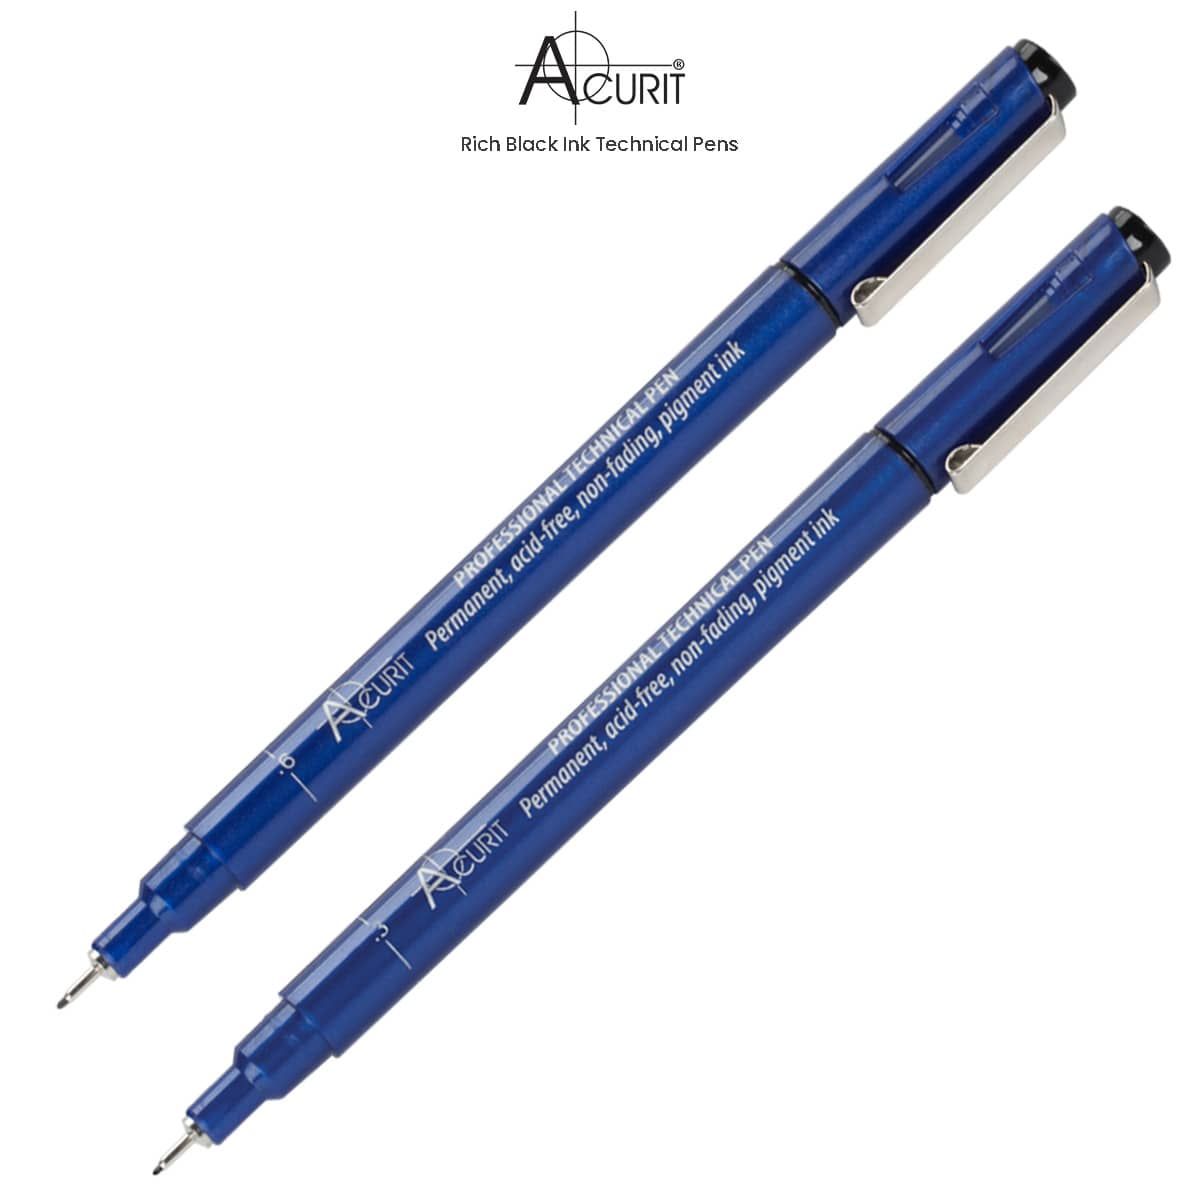 Acurit 0.20mm Fine Point Technical Drawing Pens, Black Ink for Artists,  Architects, Engineers, SmAll Nibs Acid Free Non Fading Pigment Pens - 6 Pack